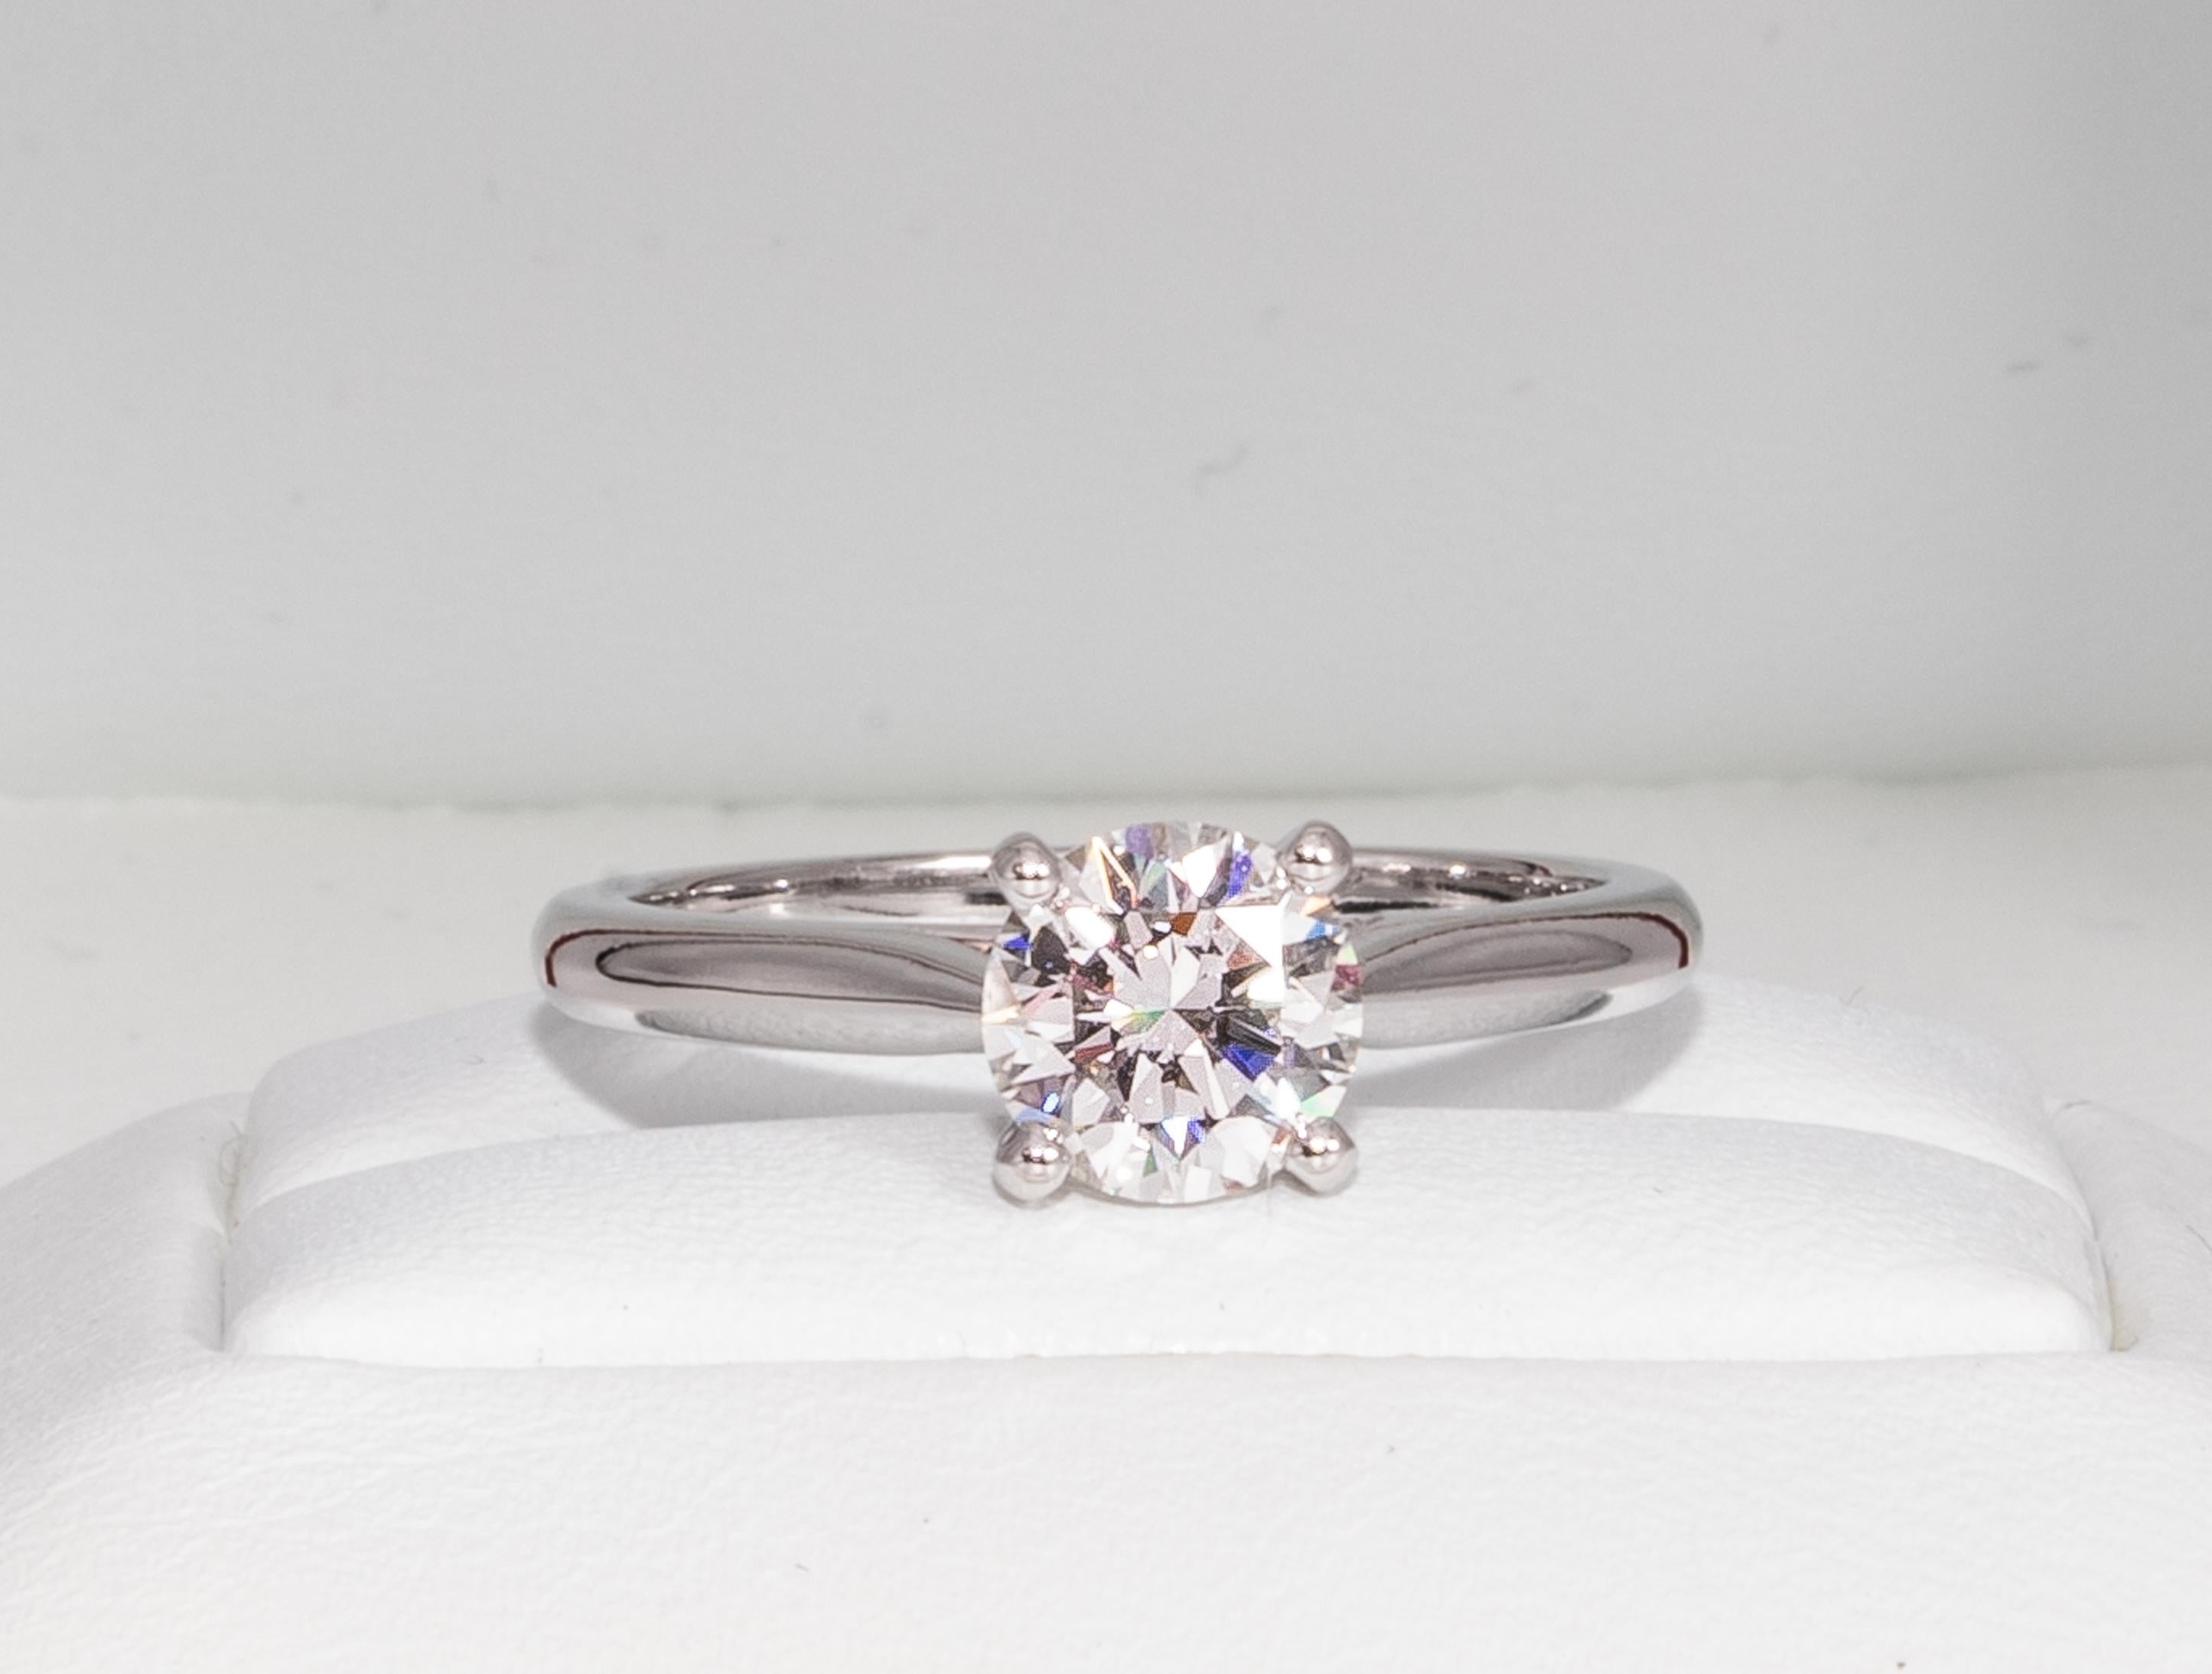 Cartier 1895 Platinum Diamond Engagement Ring signed by Cartier featuring a .91 ct Center, graded H color , and VVS2 Clarity.

Center: .91 H VVS2 GIA
Accompanied by GIA Grading Report #1142467339

Ring is currently a size 5.5 and can be expertly and